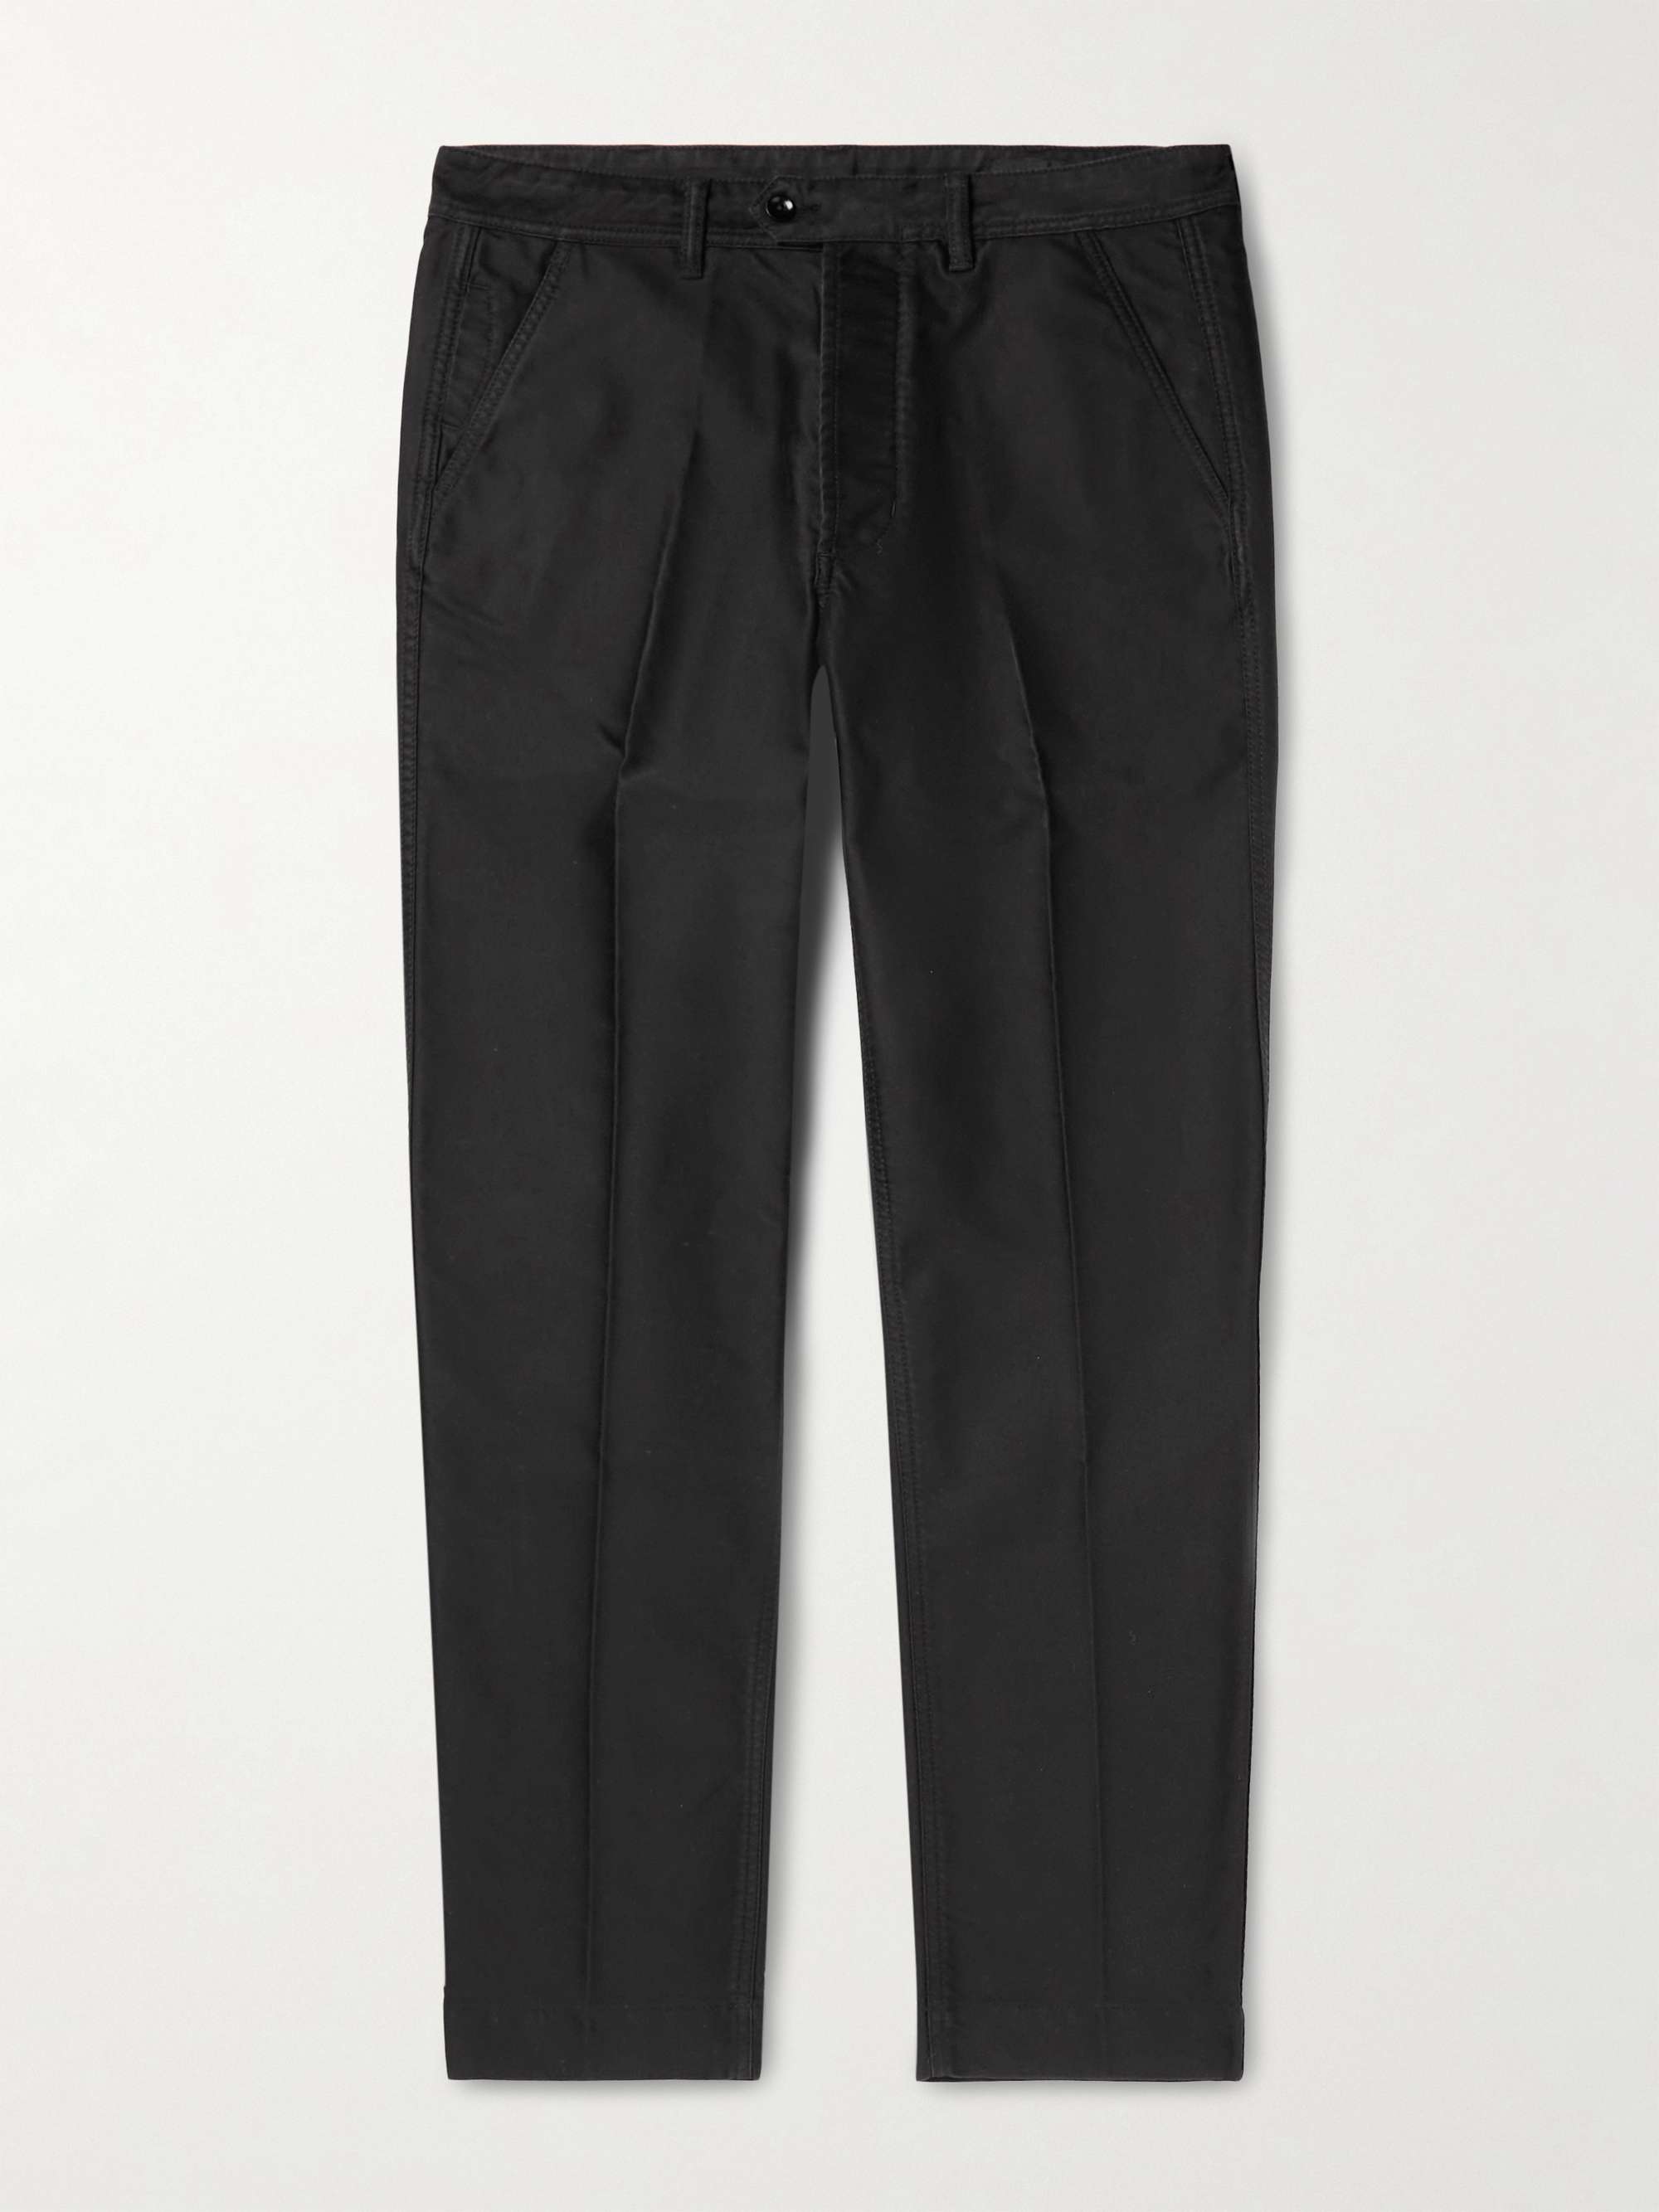 Tom Ford Satin Pants in Black Womens Clothing Trousers Slacks and Chinos Cargo trousers 